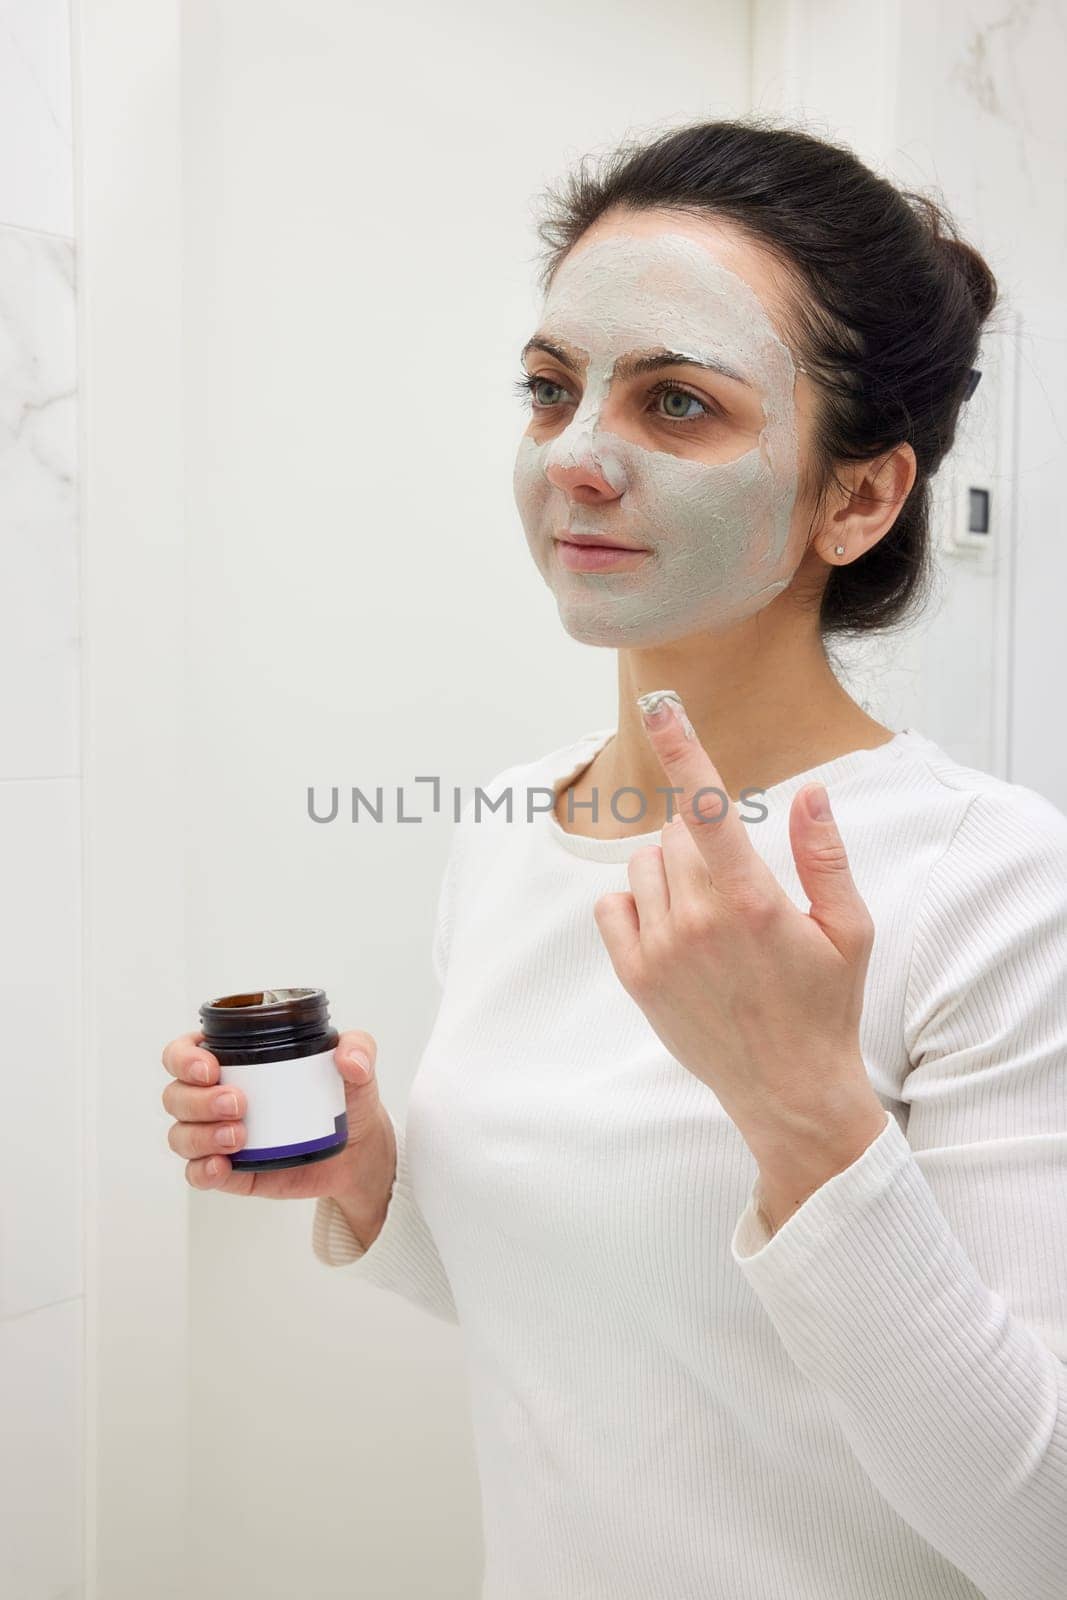 Caucasian woman looking in mirror and applying face mask white in bathroom